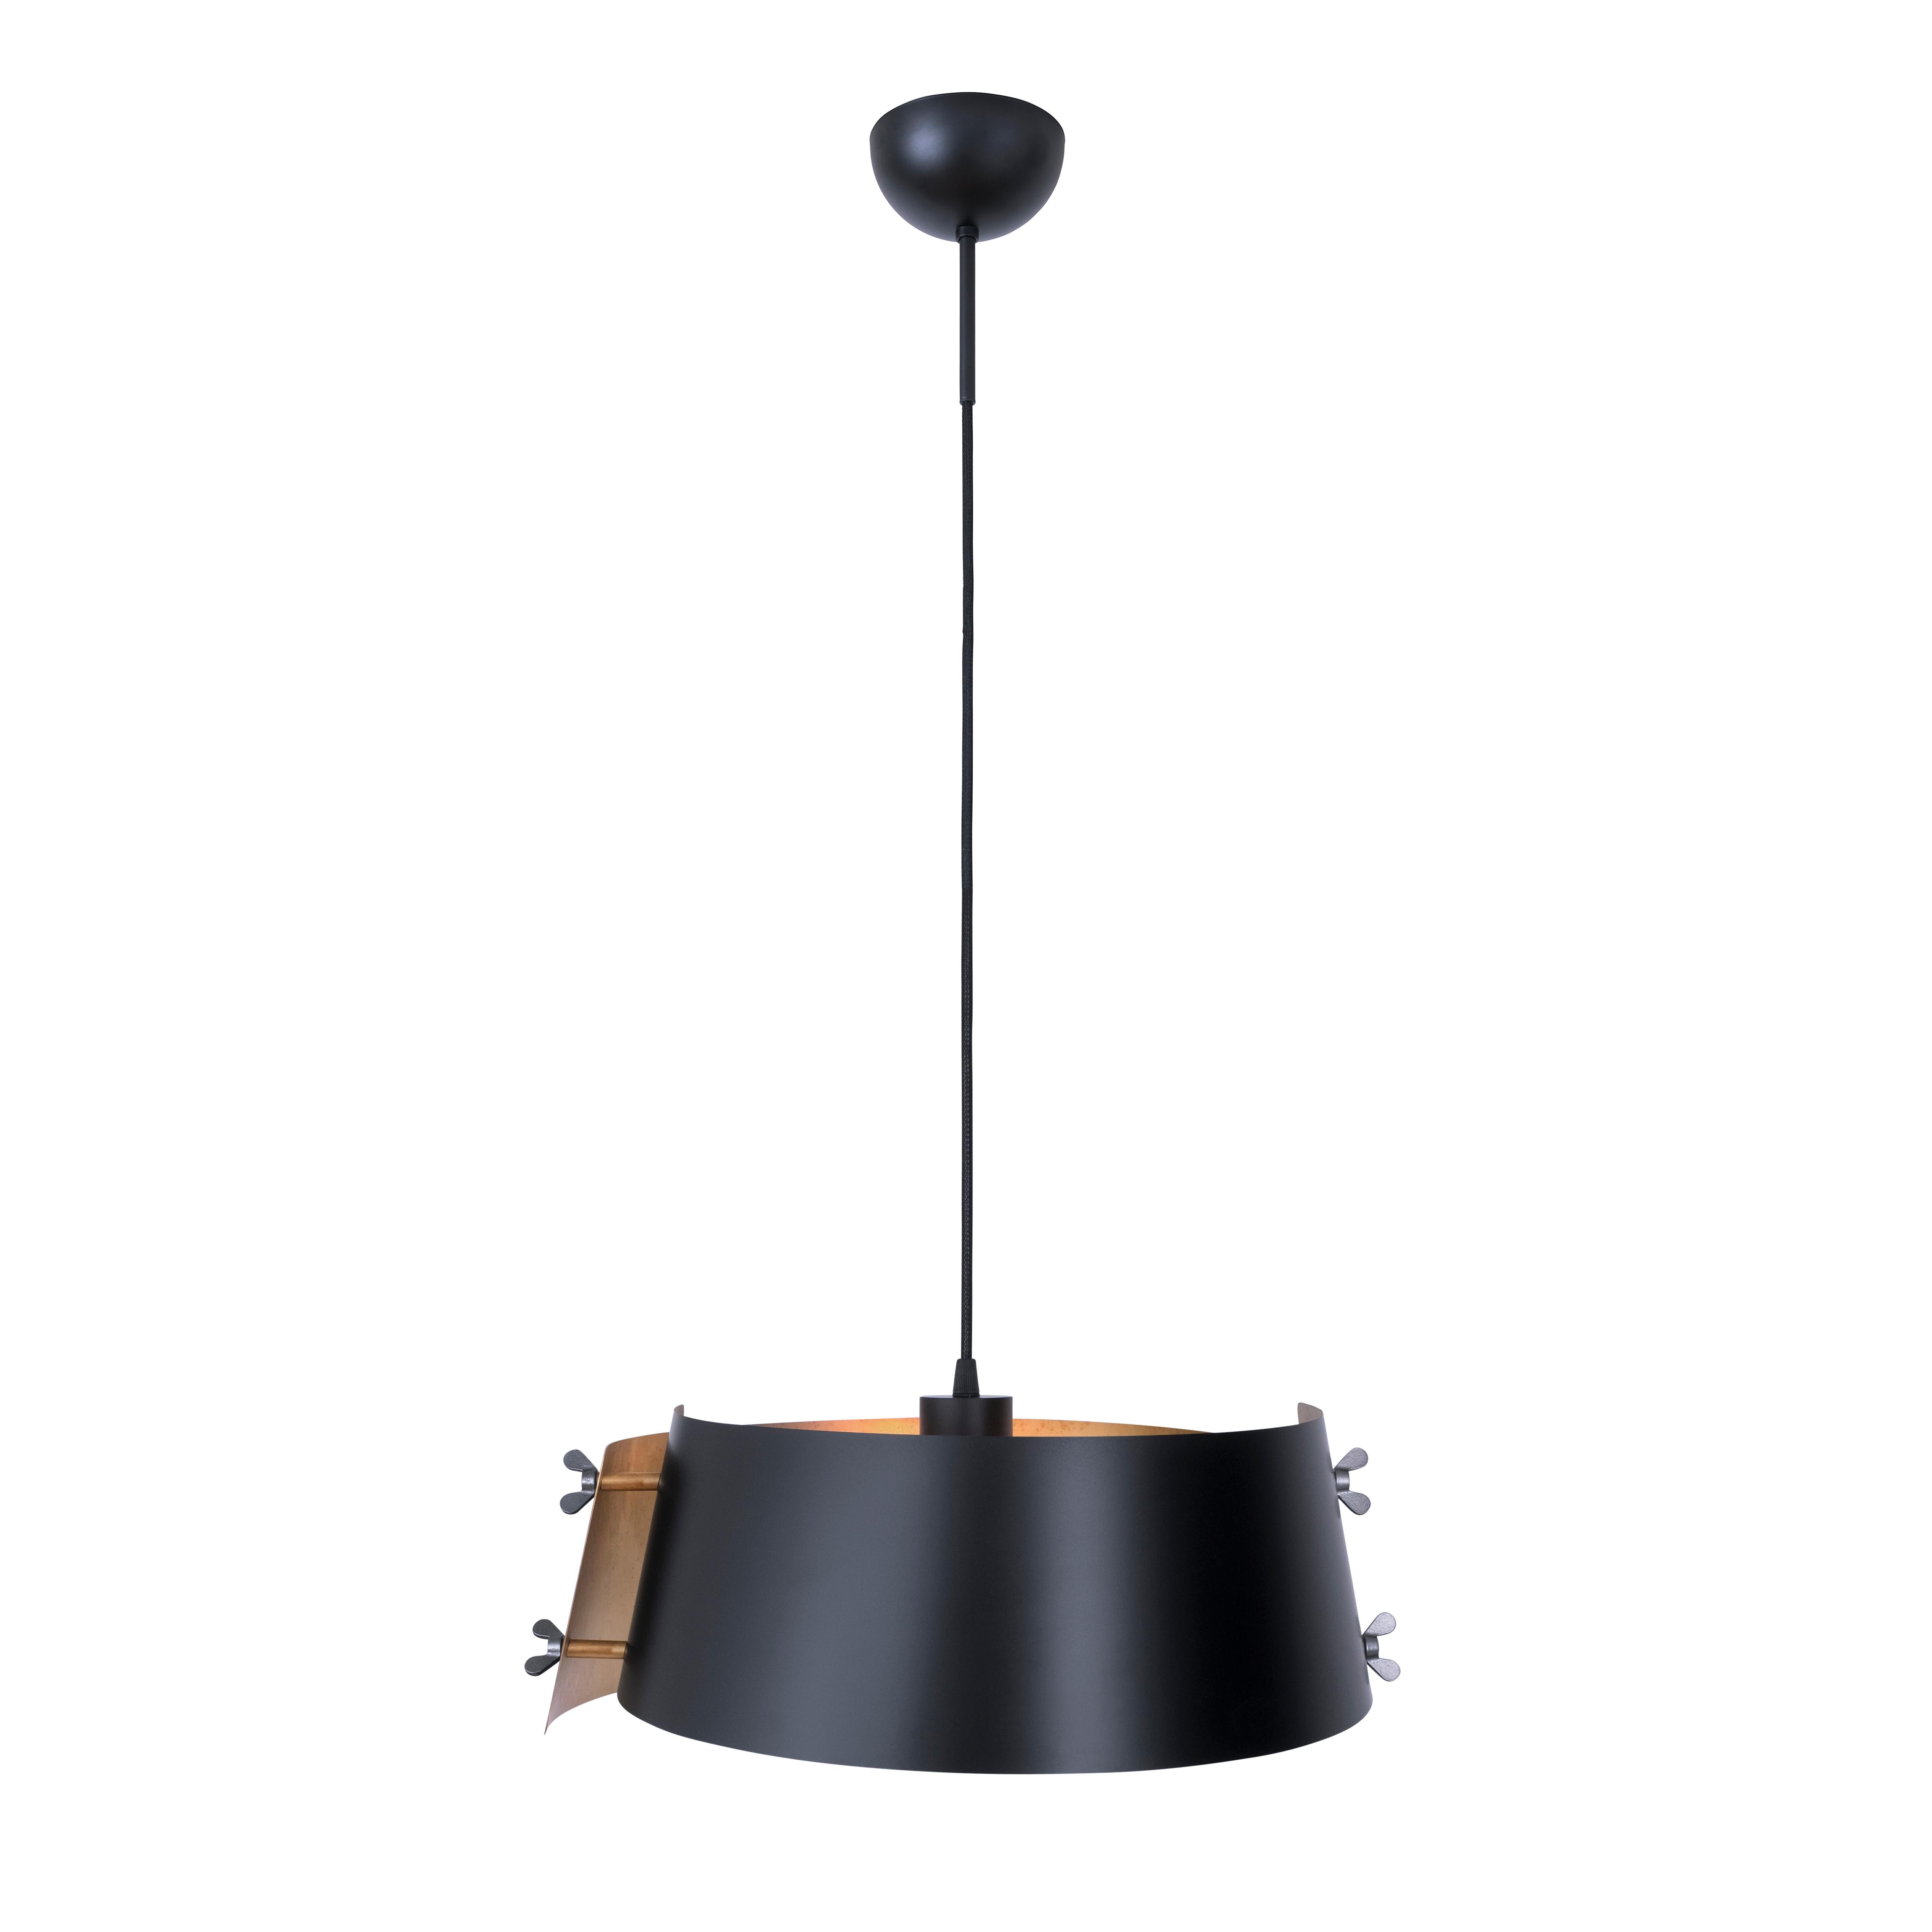 Pendant lamp manufactured by Konsthantverk Tyringe

Glipa
D. 410 mm
H. 180 mm
Max 40 W E27
3485-8 Black/raw brass

The lamps are wiring with standard Europe wiring.

This lamp is wired for Europe, if used in US or any other country the client will